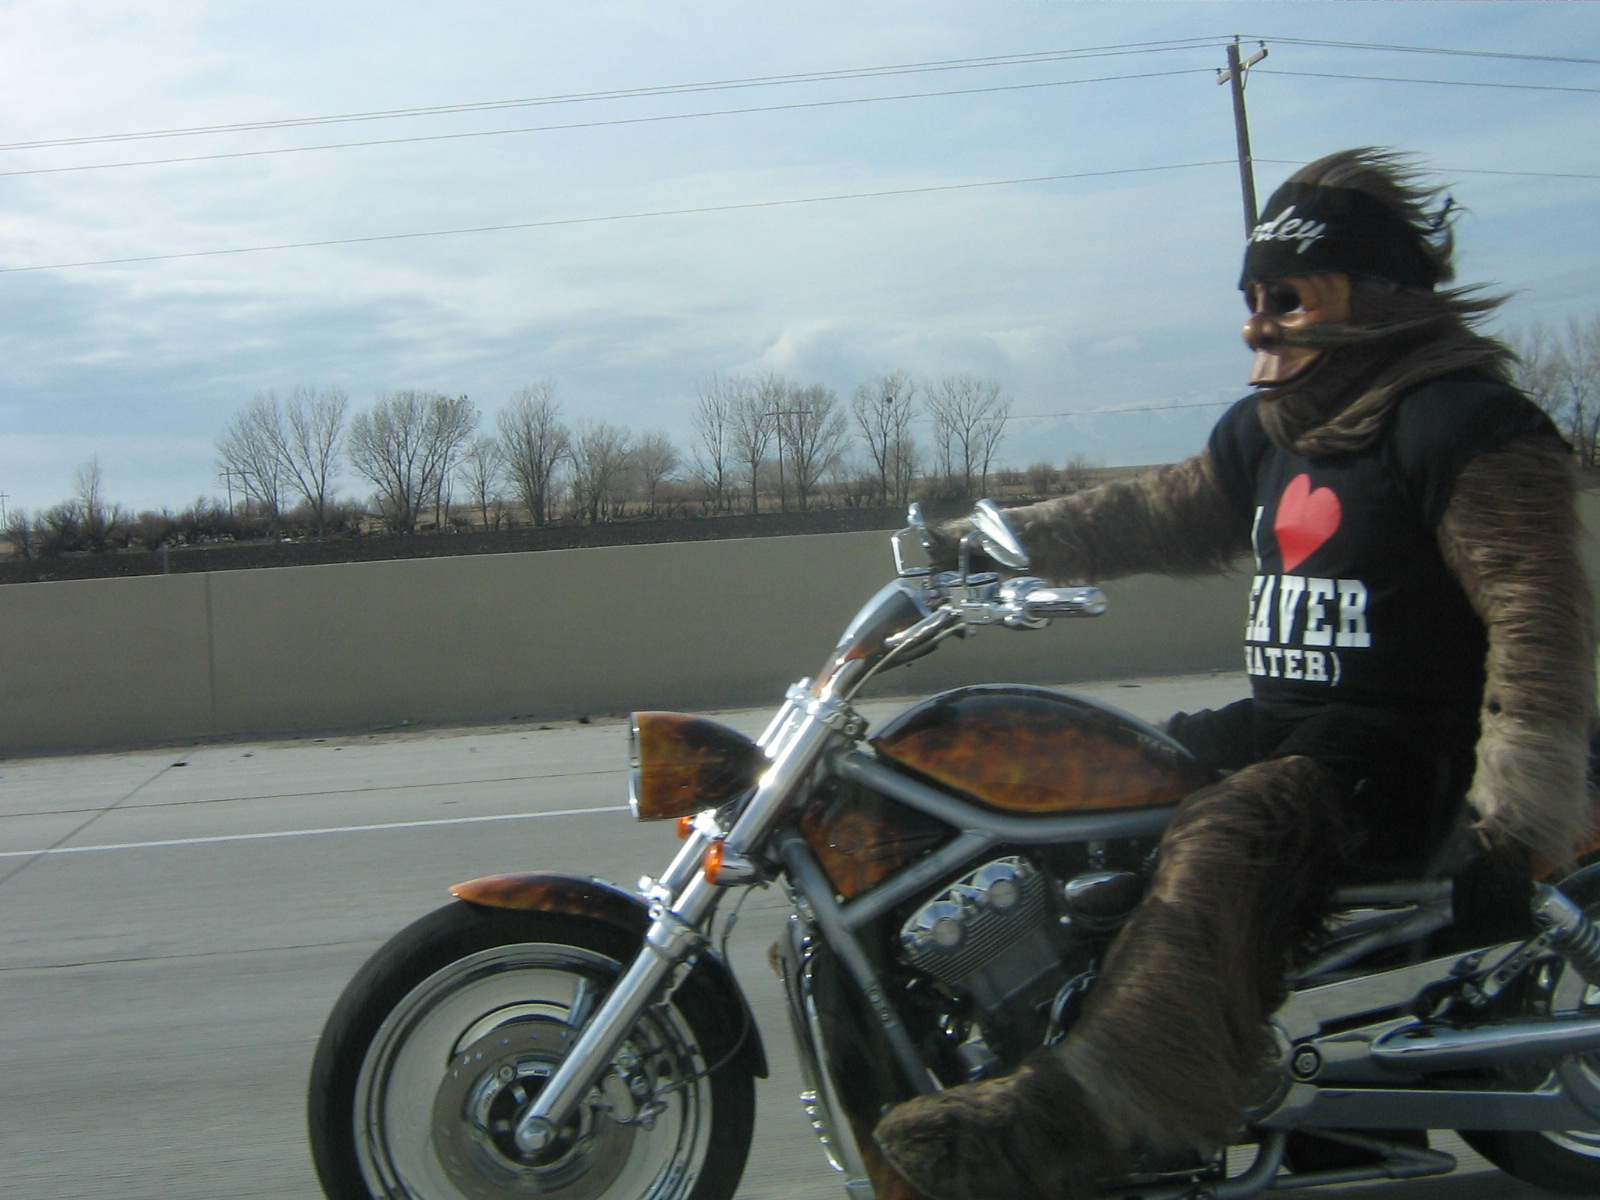 Definately, Chewbacca riding a motorcycle.